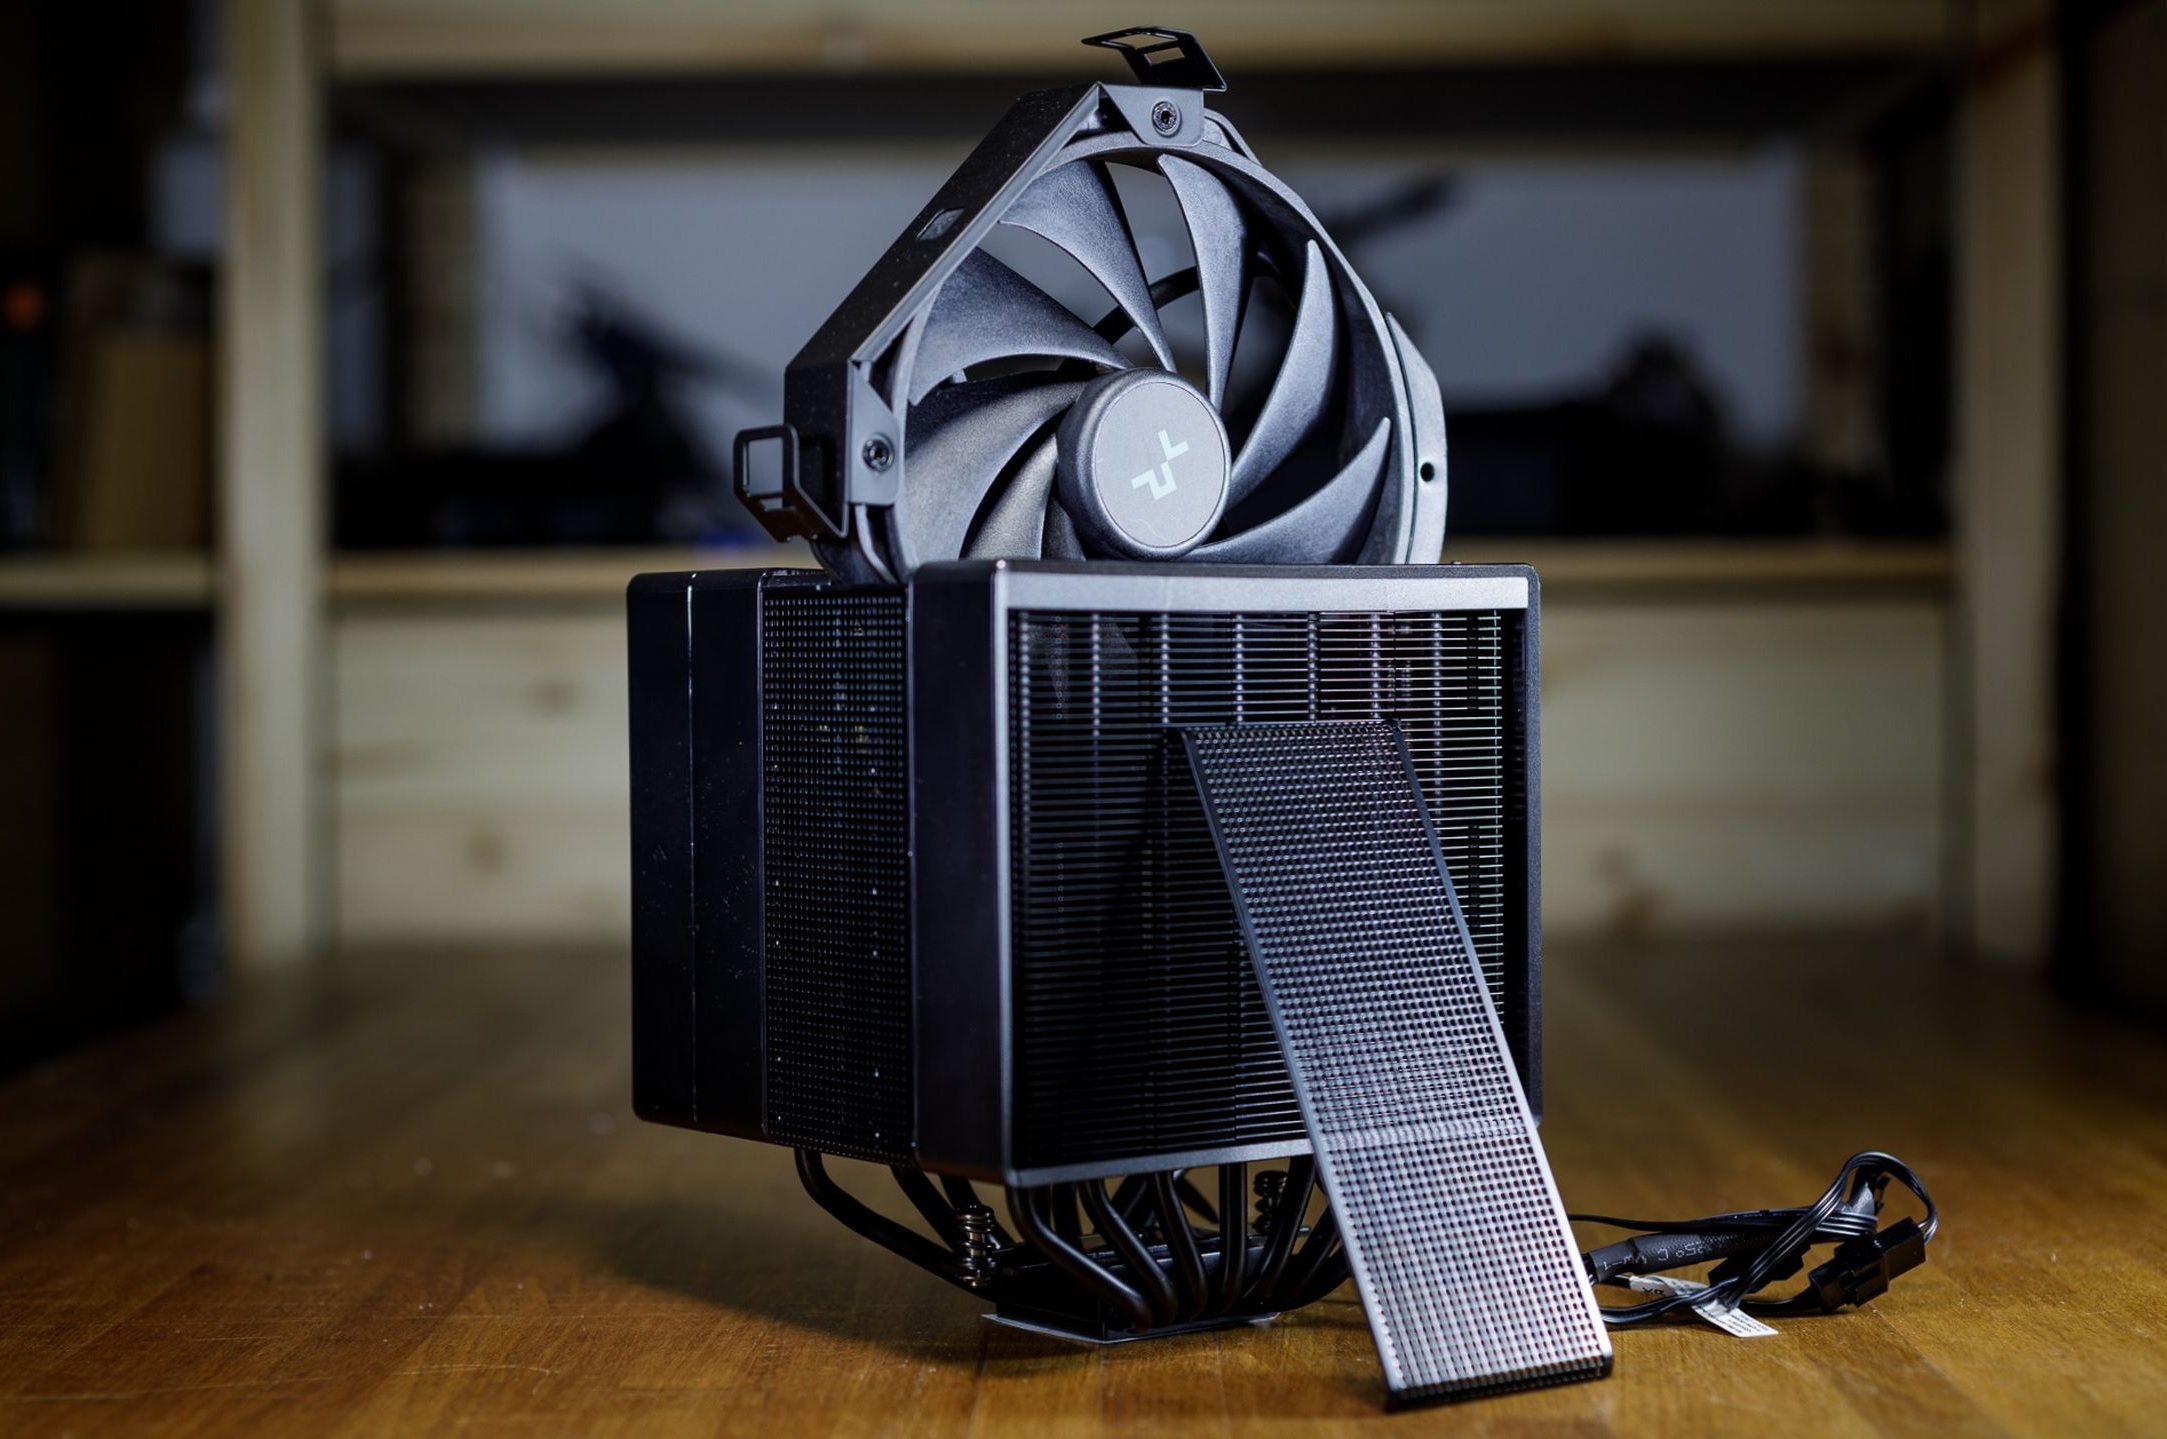 DeepCool Assassin IV cooler officially. Tests are close 